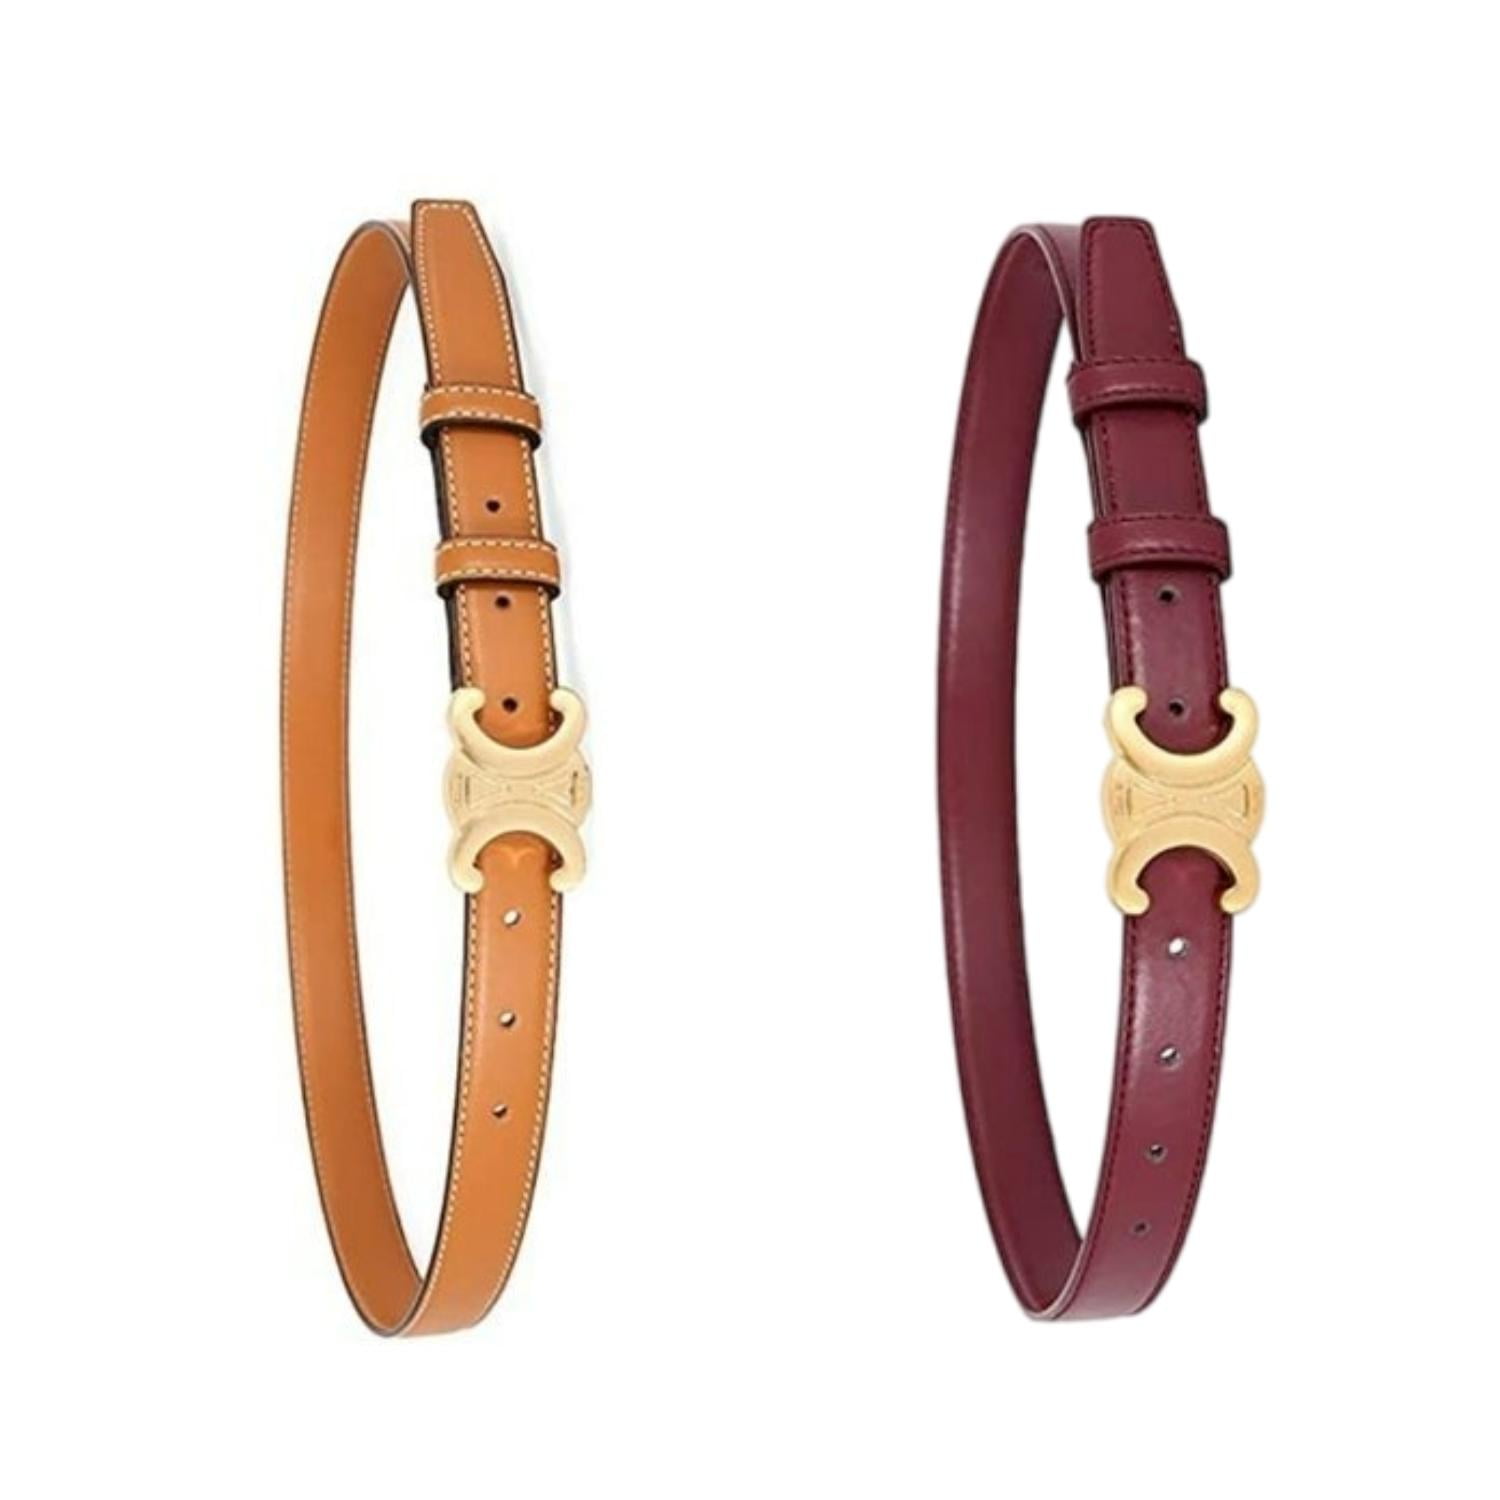 Women's 0.98 Inch Width Thin Leather Belt Fashion Designer Belts for Jeans  Pants Dresses with Gold BuckleCallanCity - Personalized Luxury GIFT,Phone  Accessories,Watch Accessories